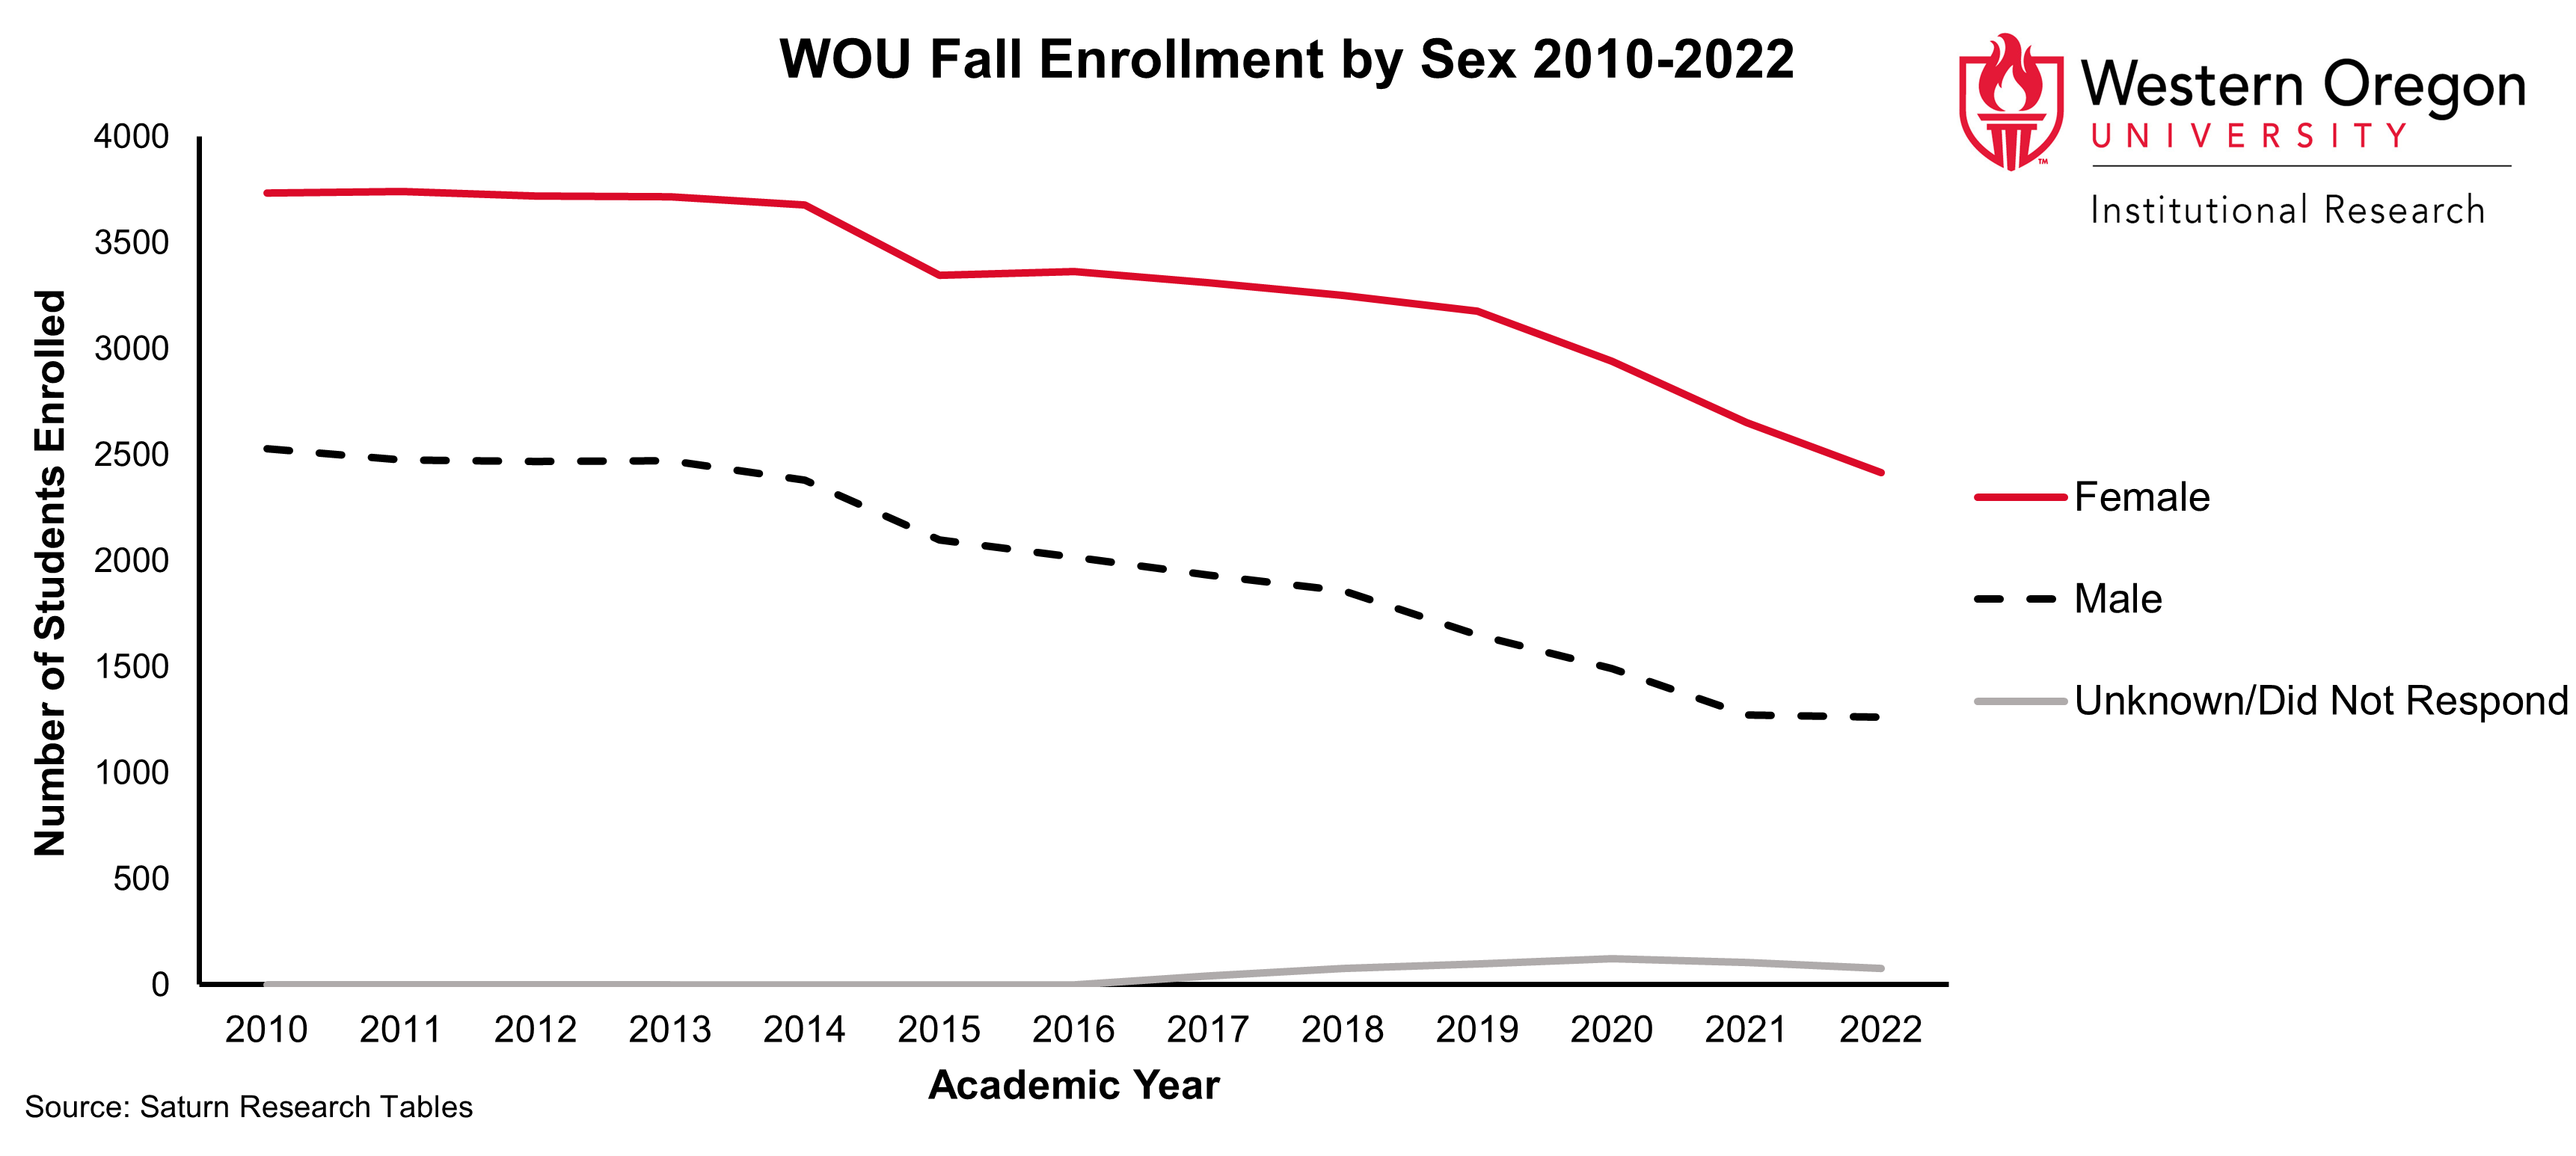 Bar graph of Fall enrollment counts since Fall 2010 for WOU students, showing that enrollment has been steadily declining since Fall 2010 for each student group except students for which sex is unknown/did not respond